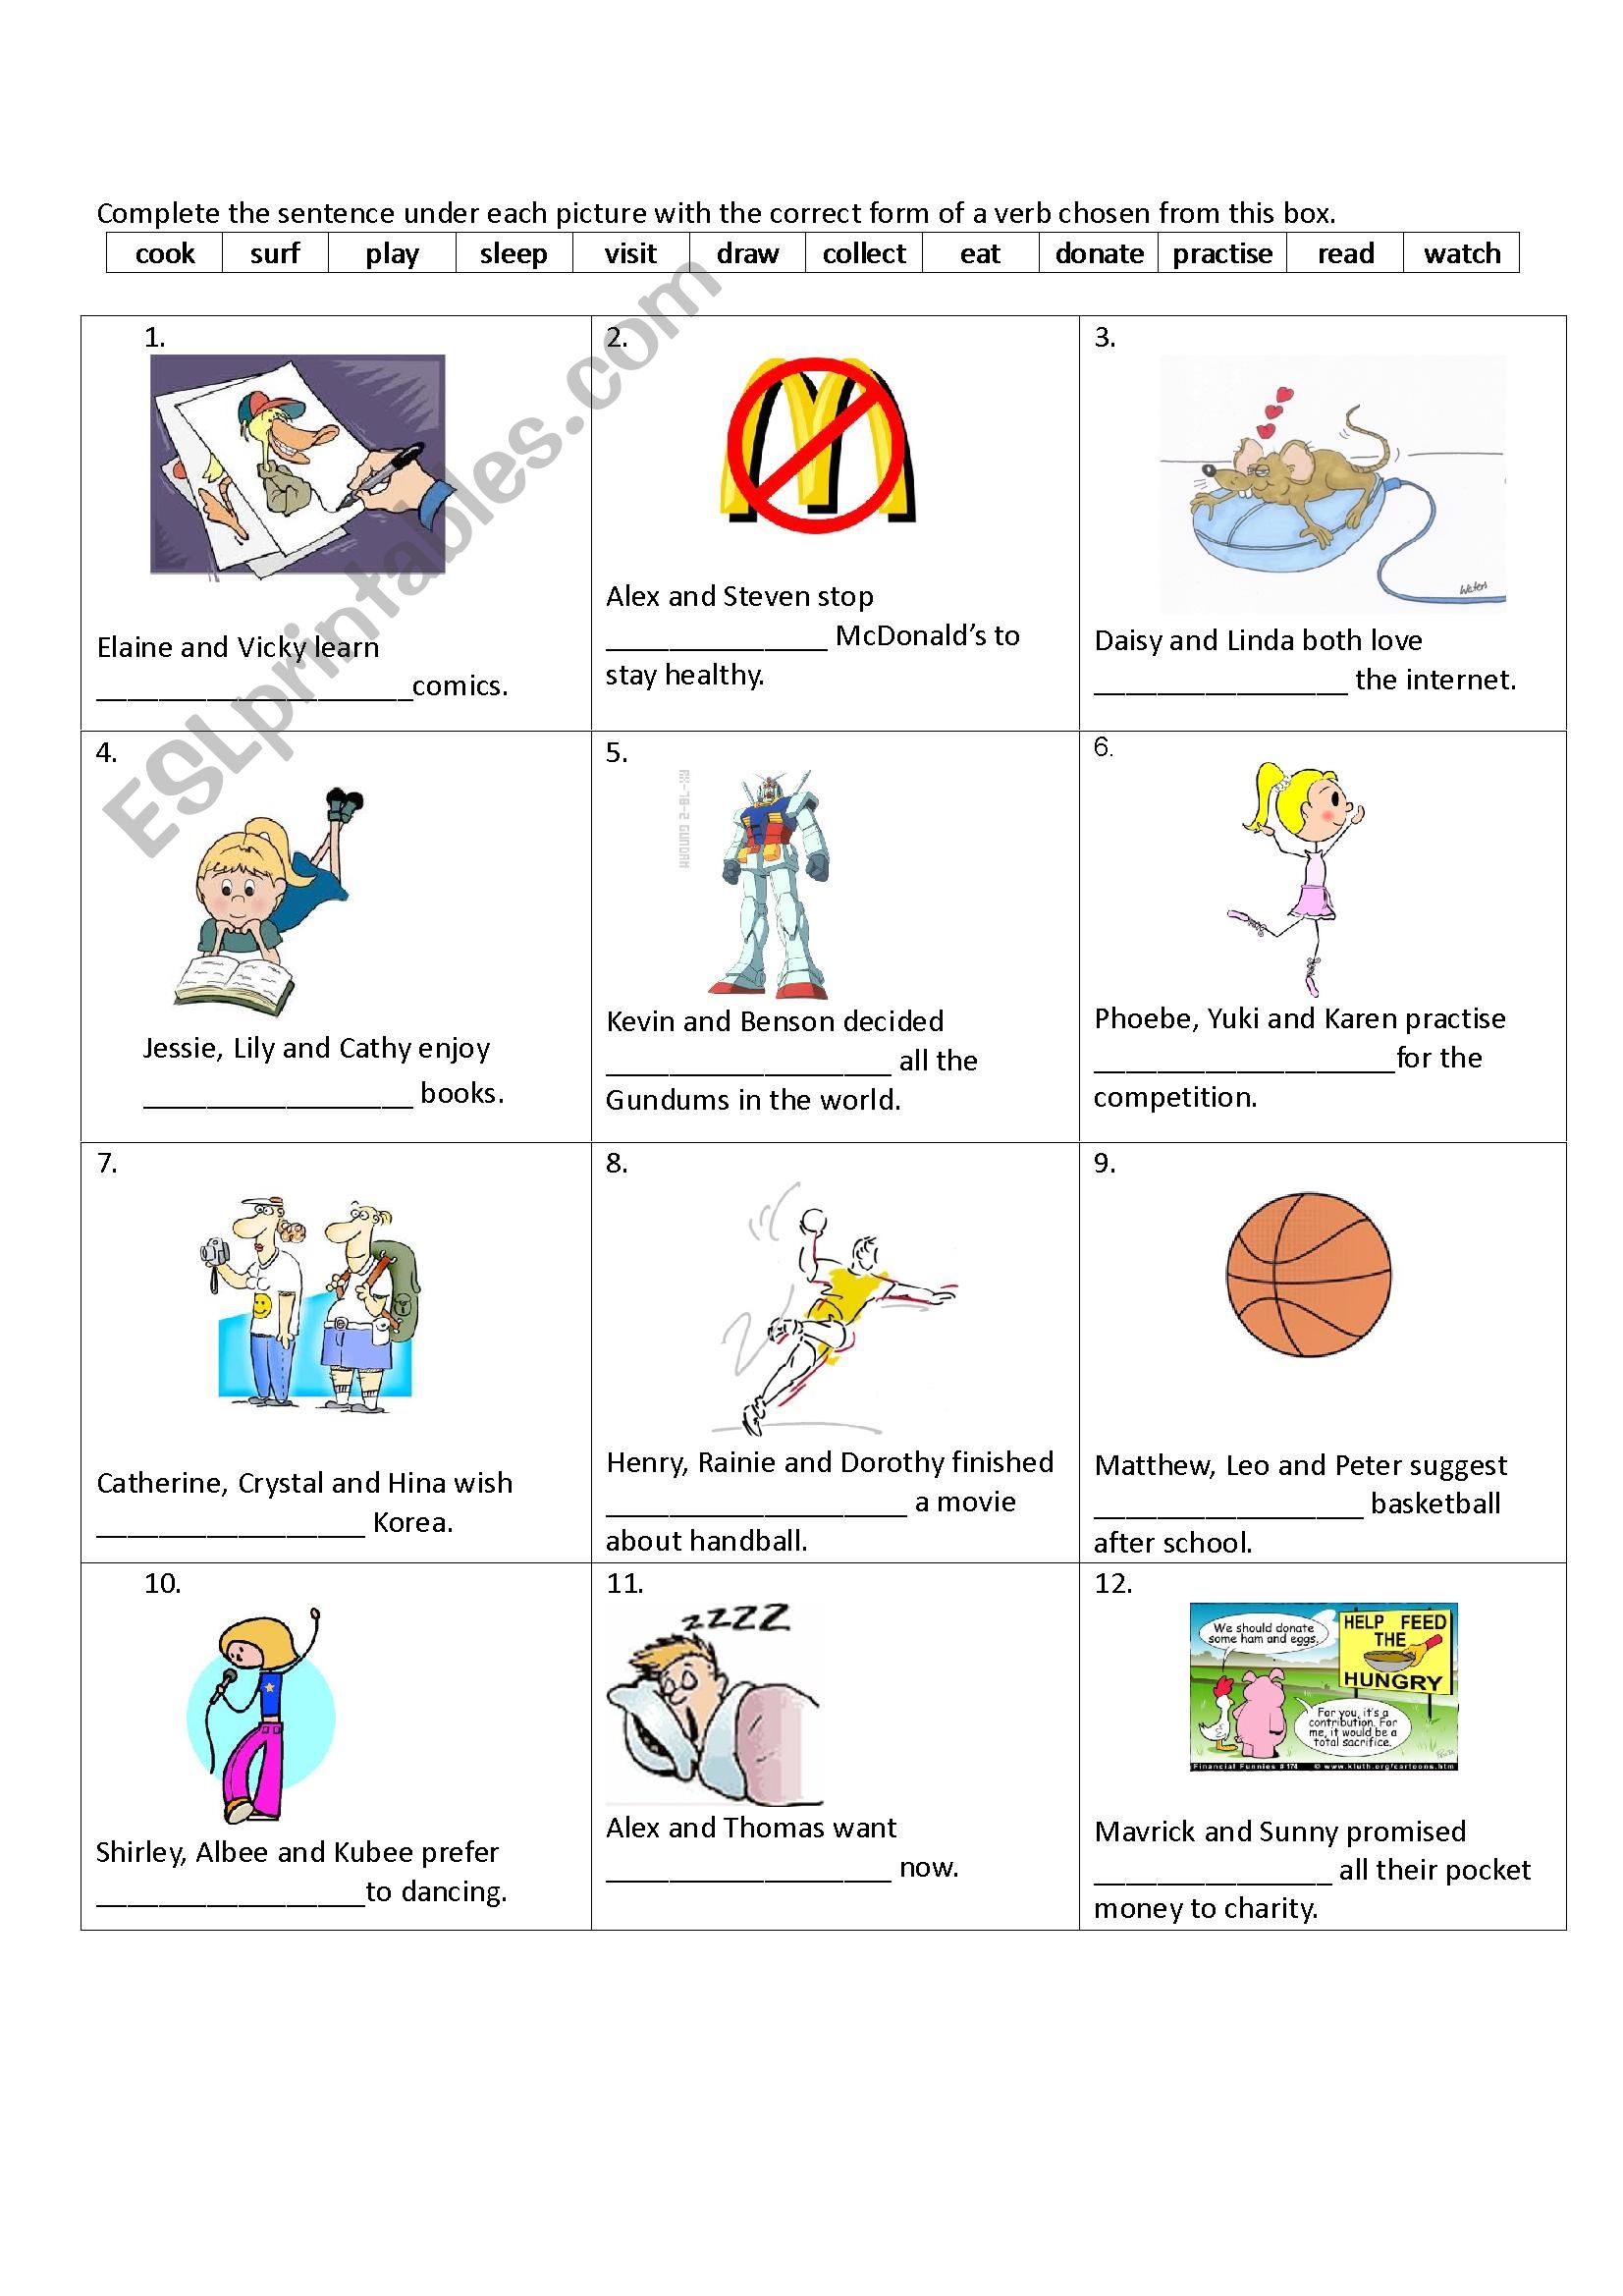 Verbs followed by gerund and to-infinitive